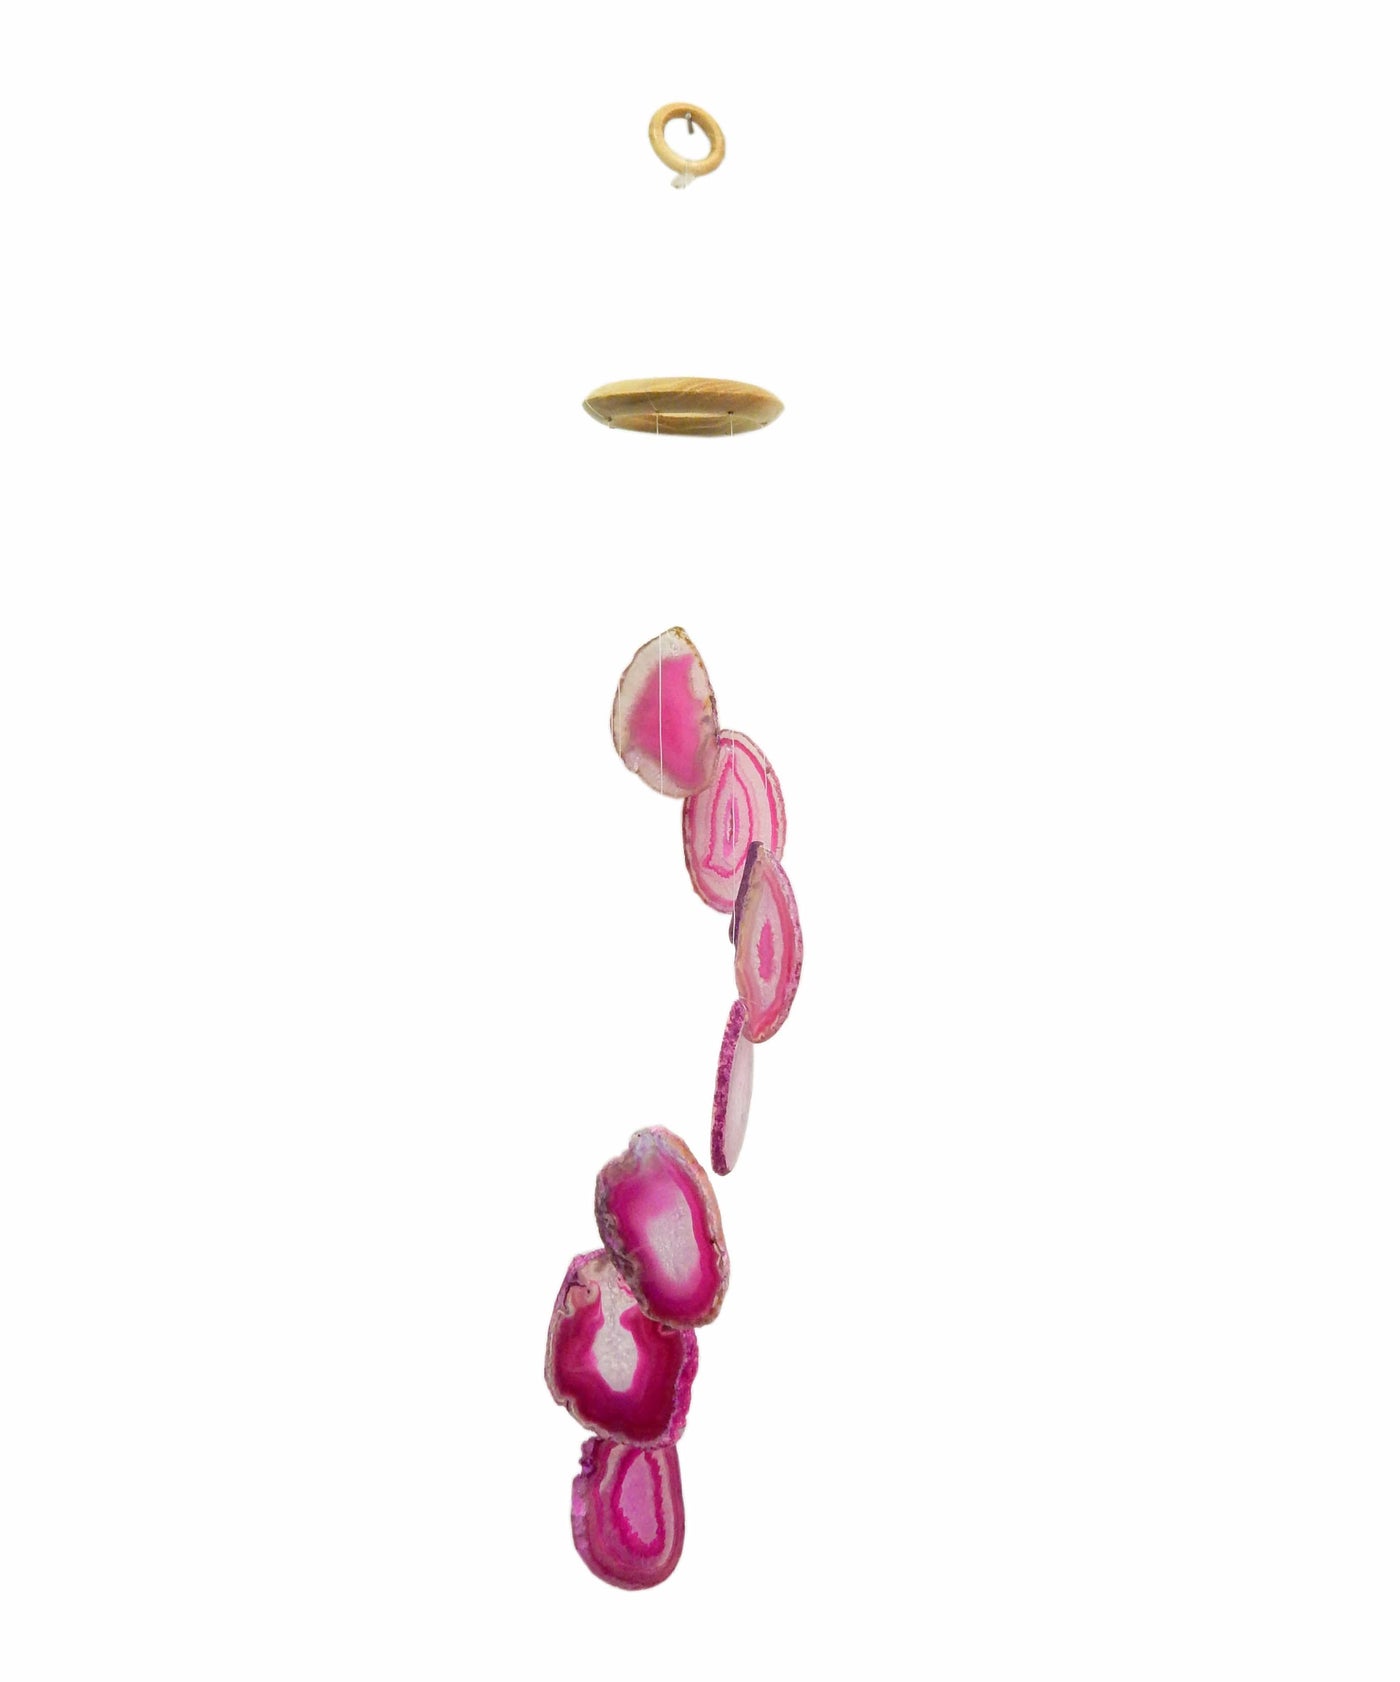 Picture of our pink agate windchime hanging, displayed on a white background.